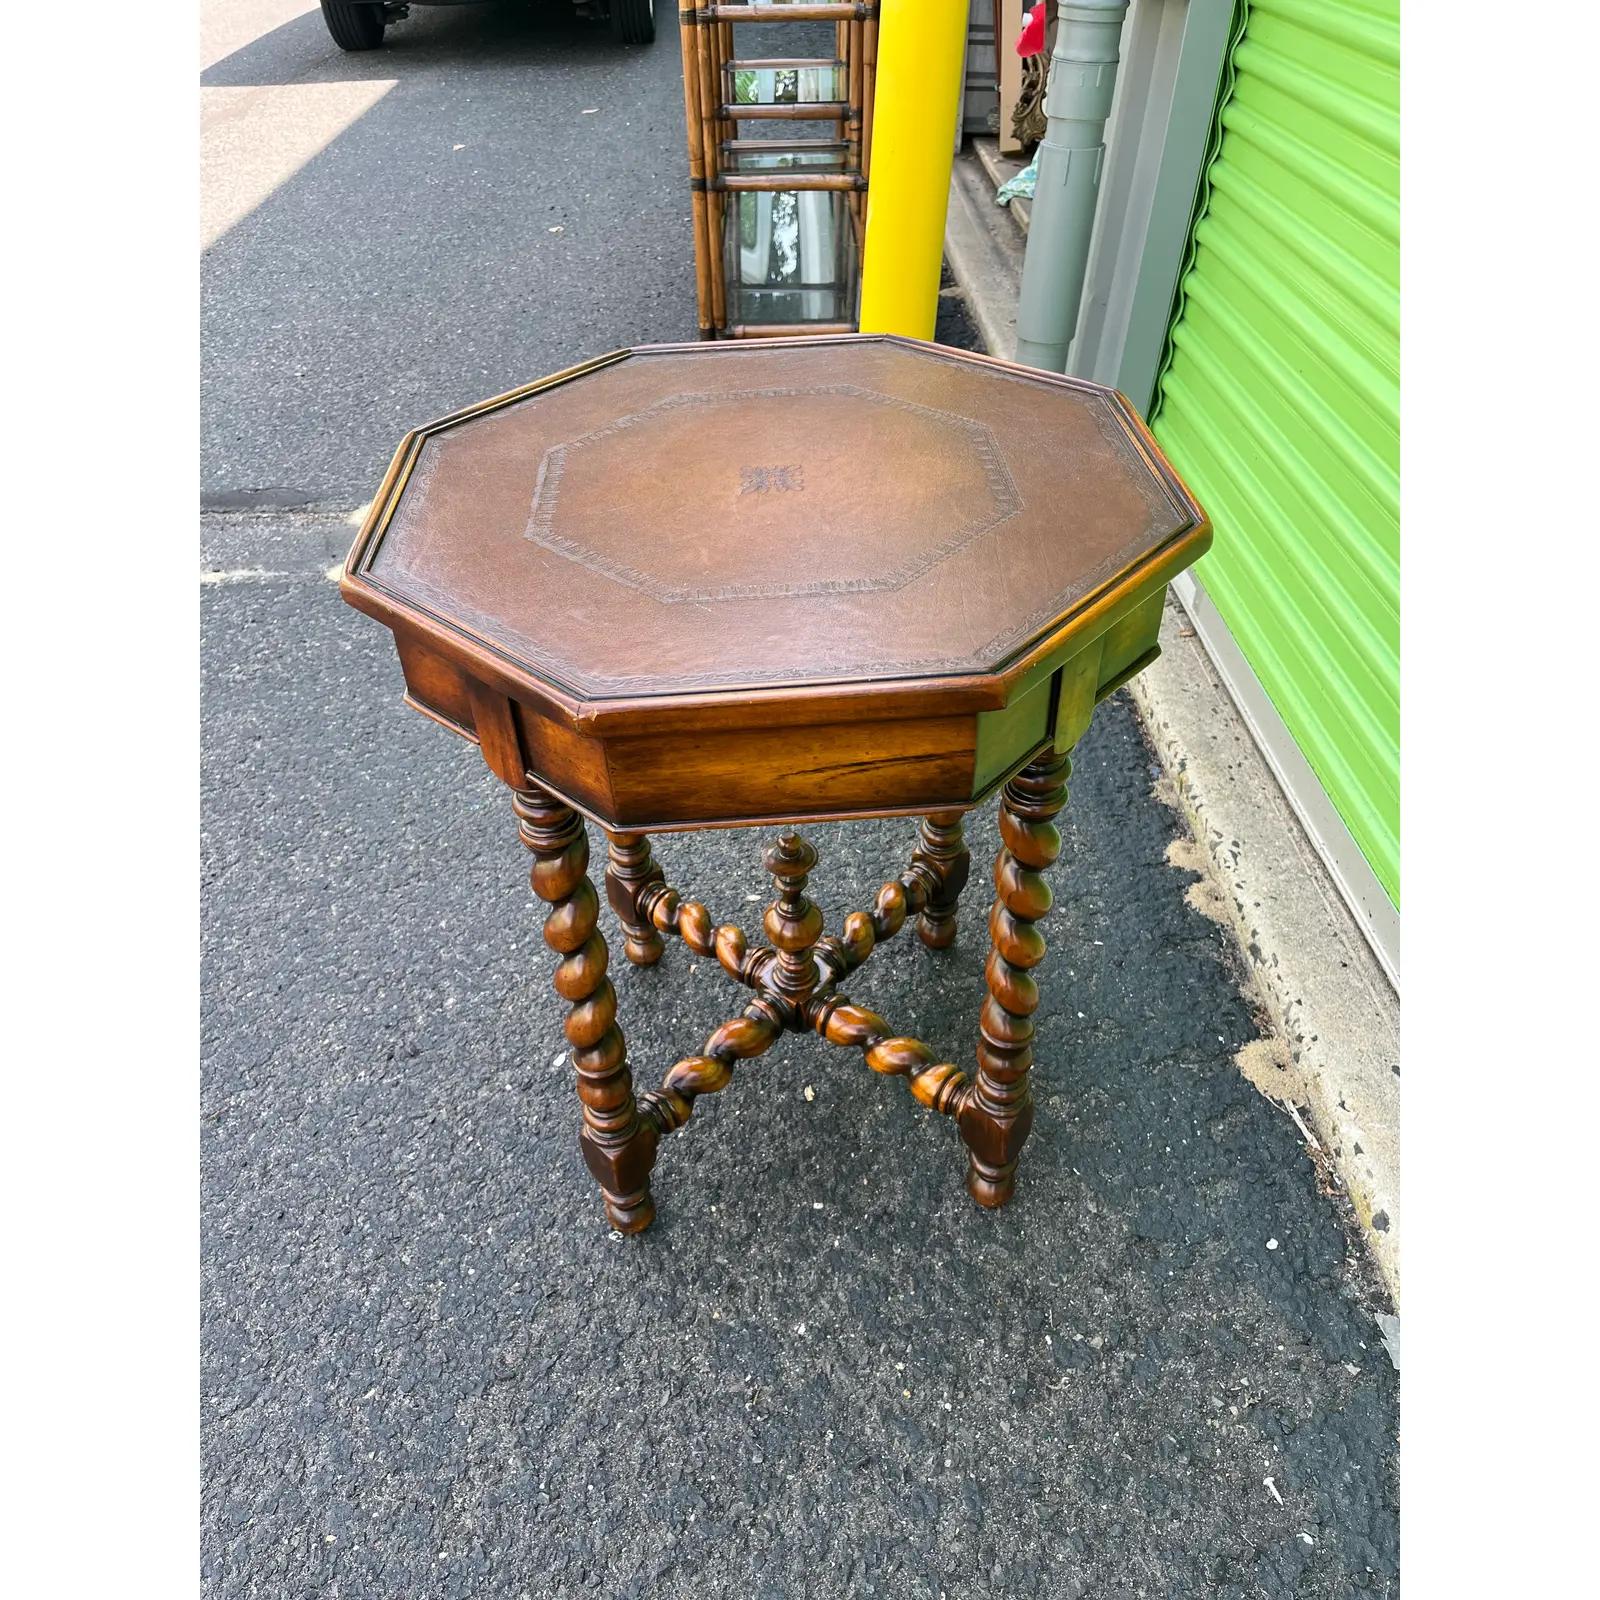 Vintage side table or nightstand with eye-catching barley twist legs and shaped stretches. Impressive final at the center of the stretchers. Embossed leather top. Single drawer.
Curbside available $350